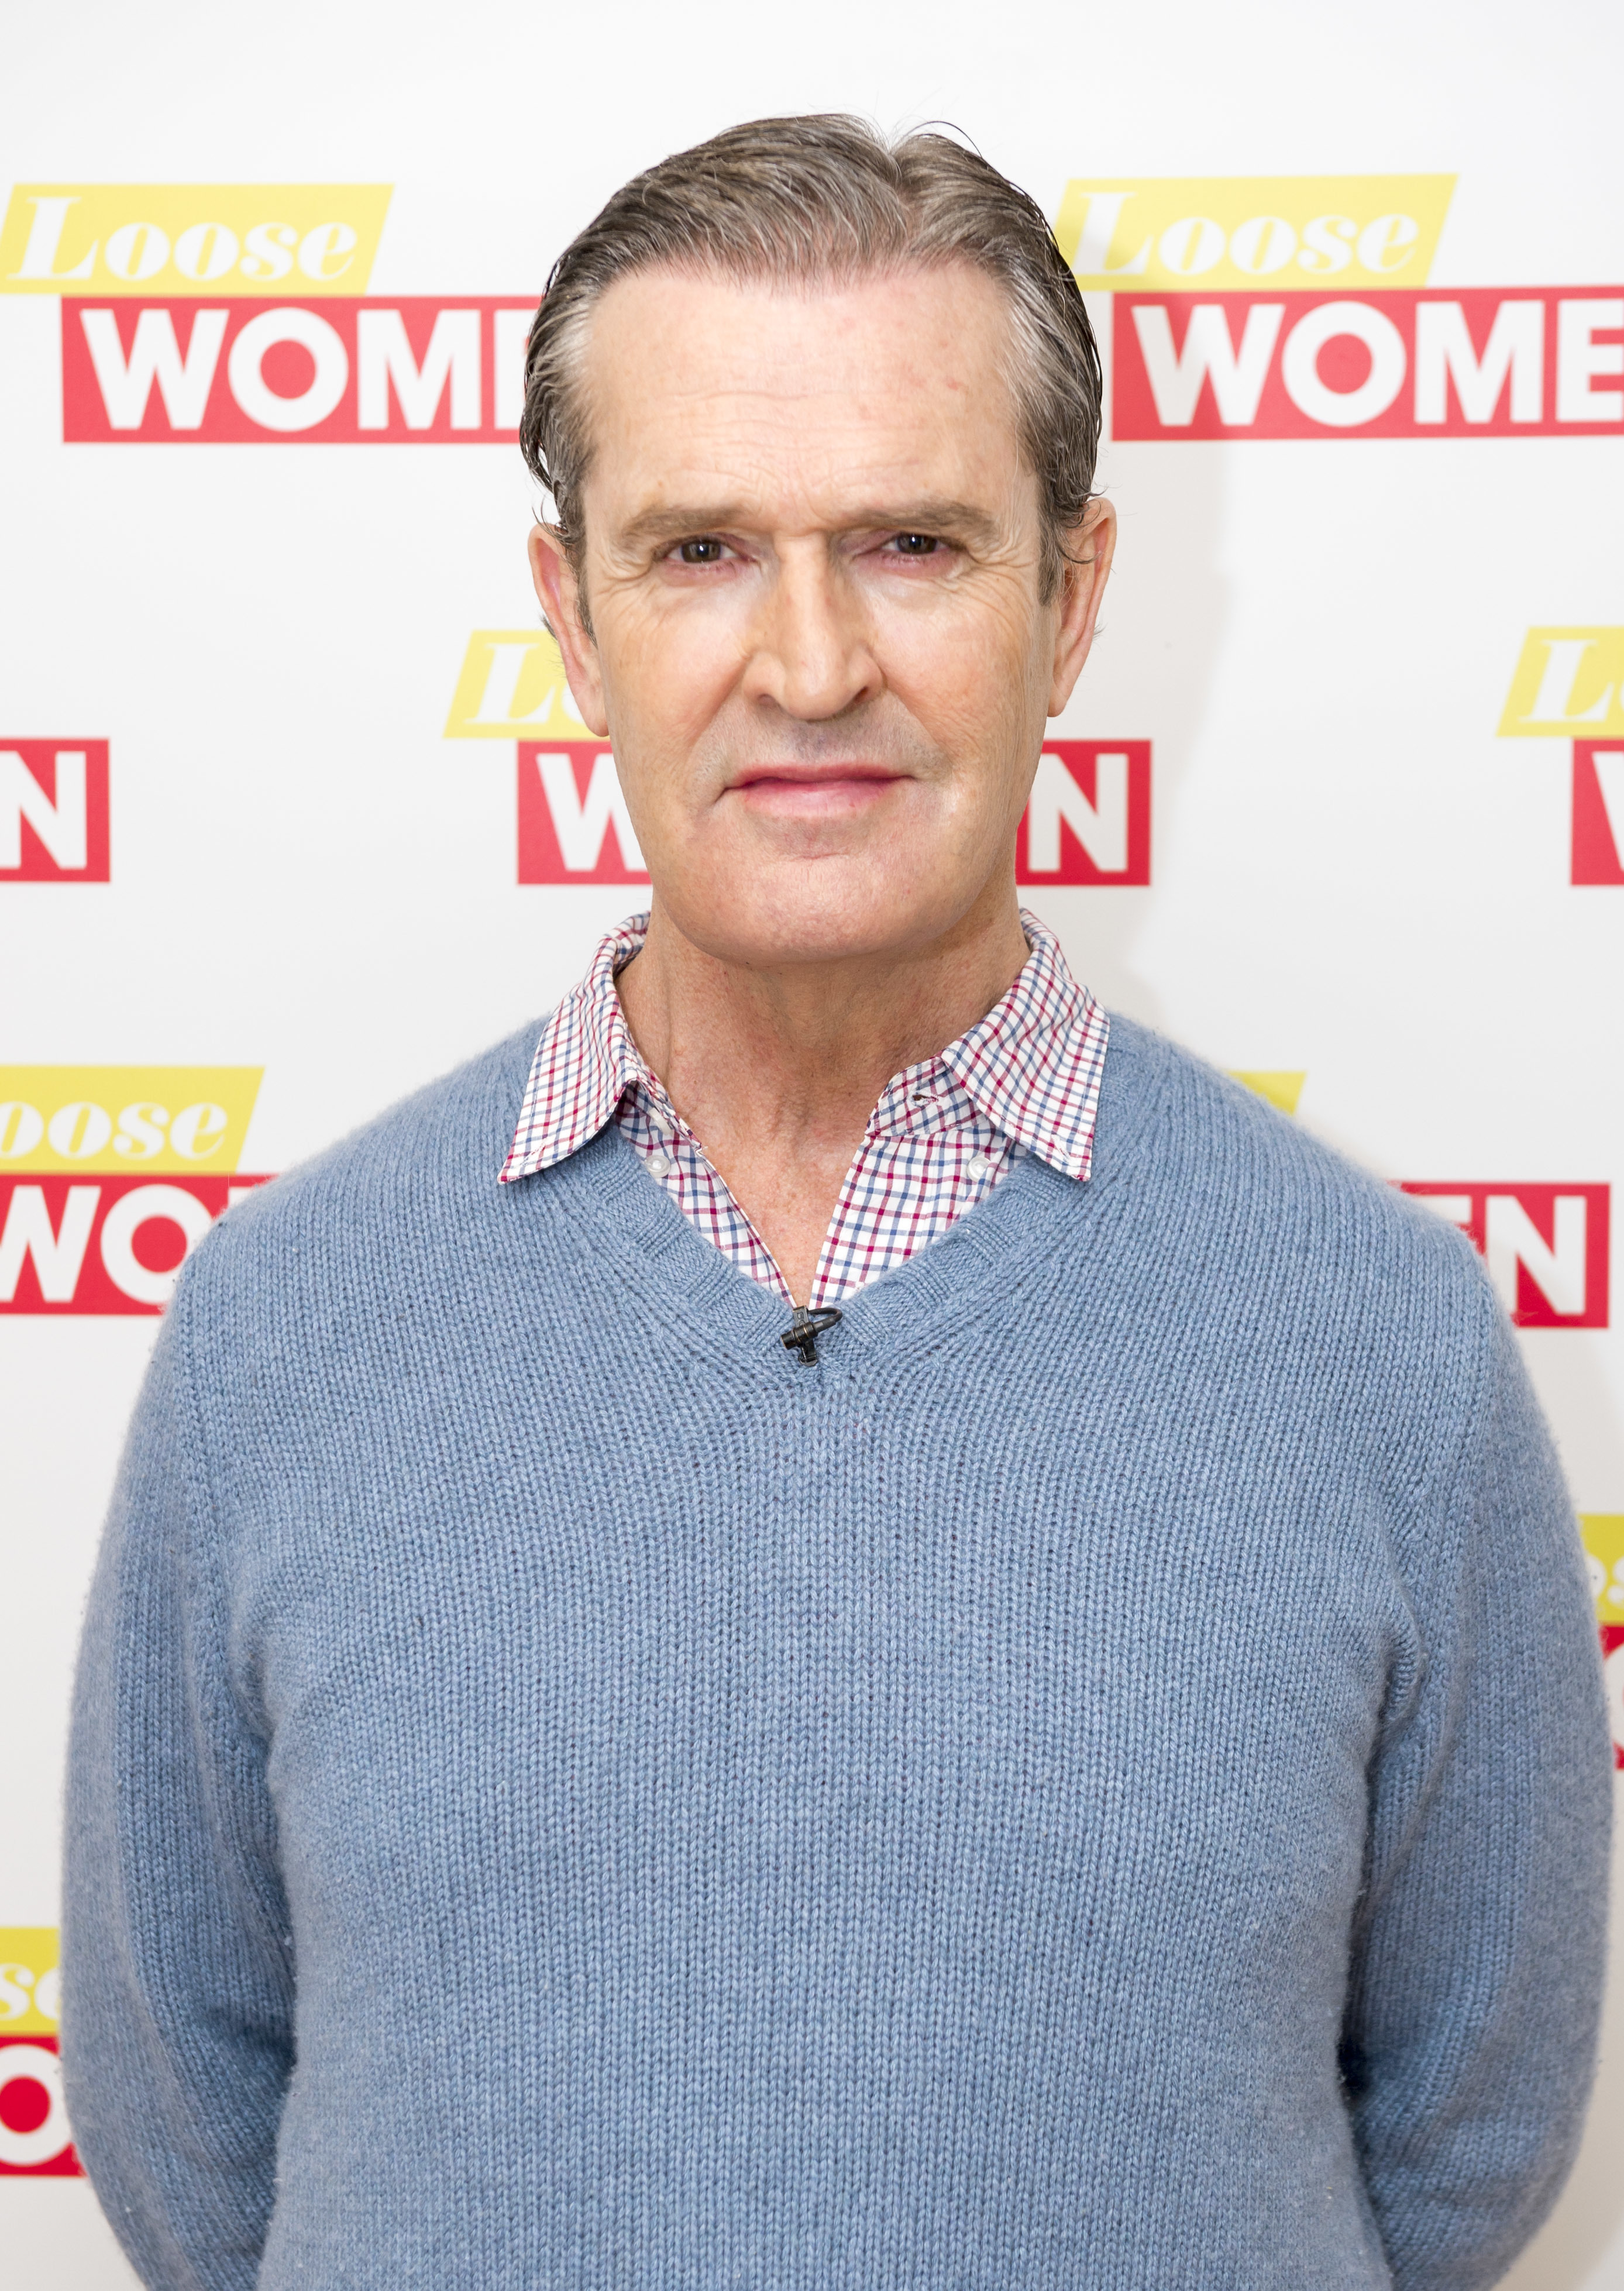 <p>Rupert Everett seemed to be wearing fewer years on his face when he visited the "Loose Women" studios in London on June 29, 2016. He's denied that plastic surgery was responsible for the turning back of time, but how else do you explain the fact that he had far fewer wrinkles in 2016 than in 2007?</p>